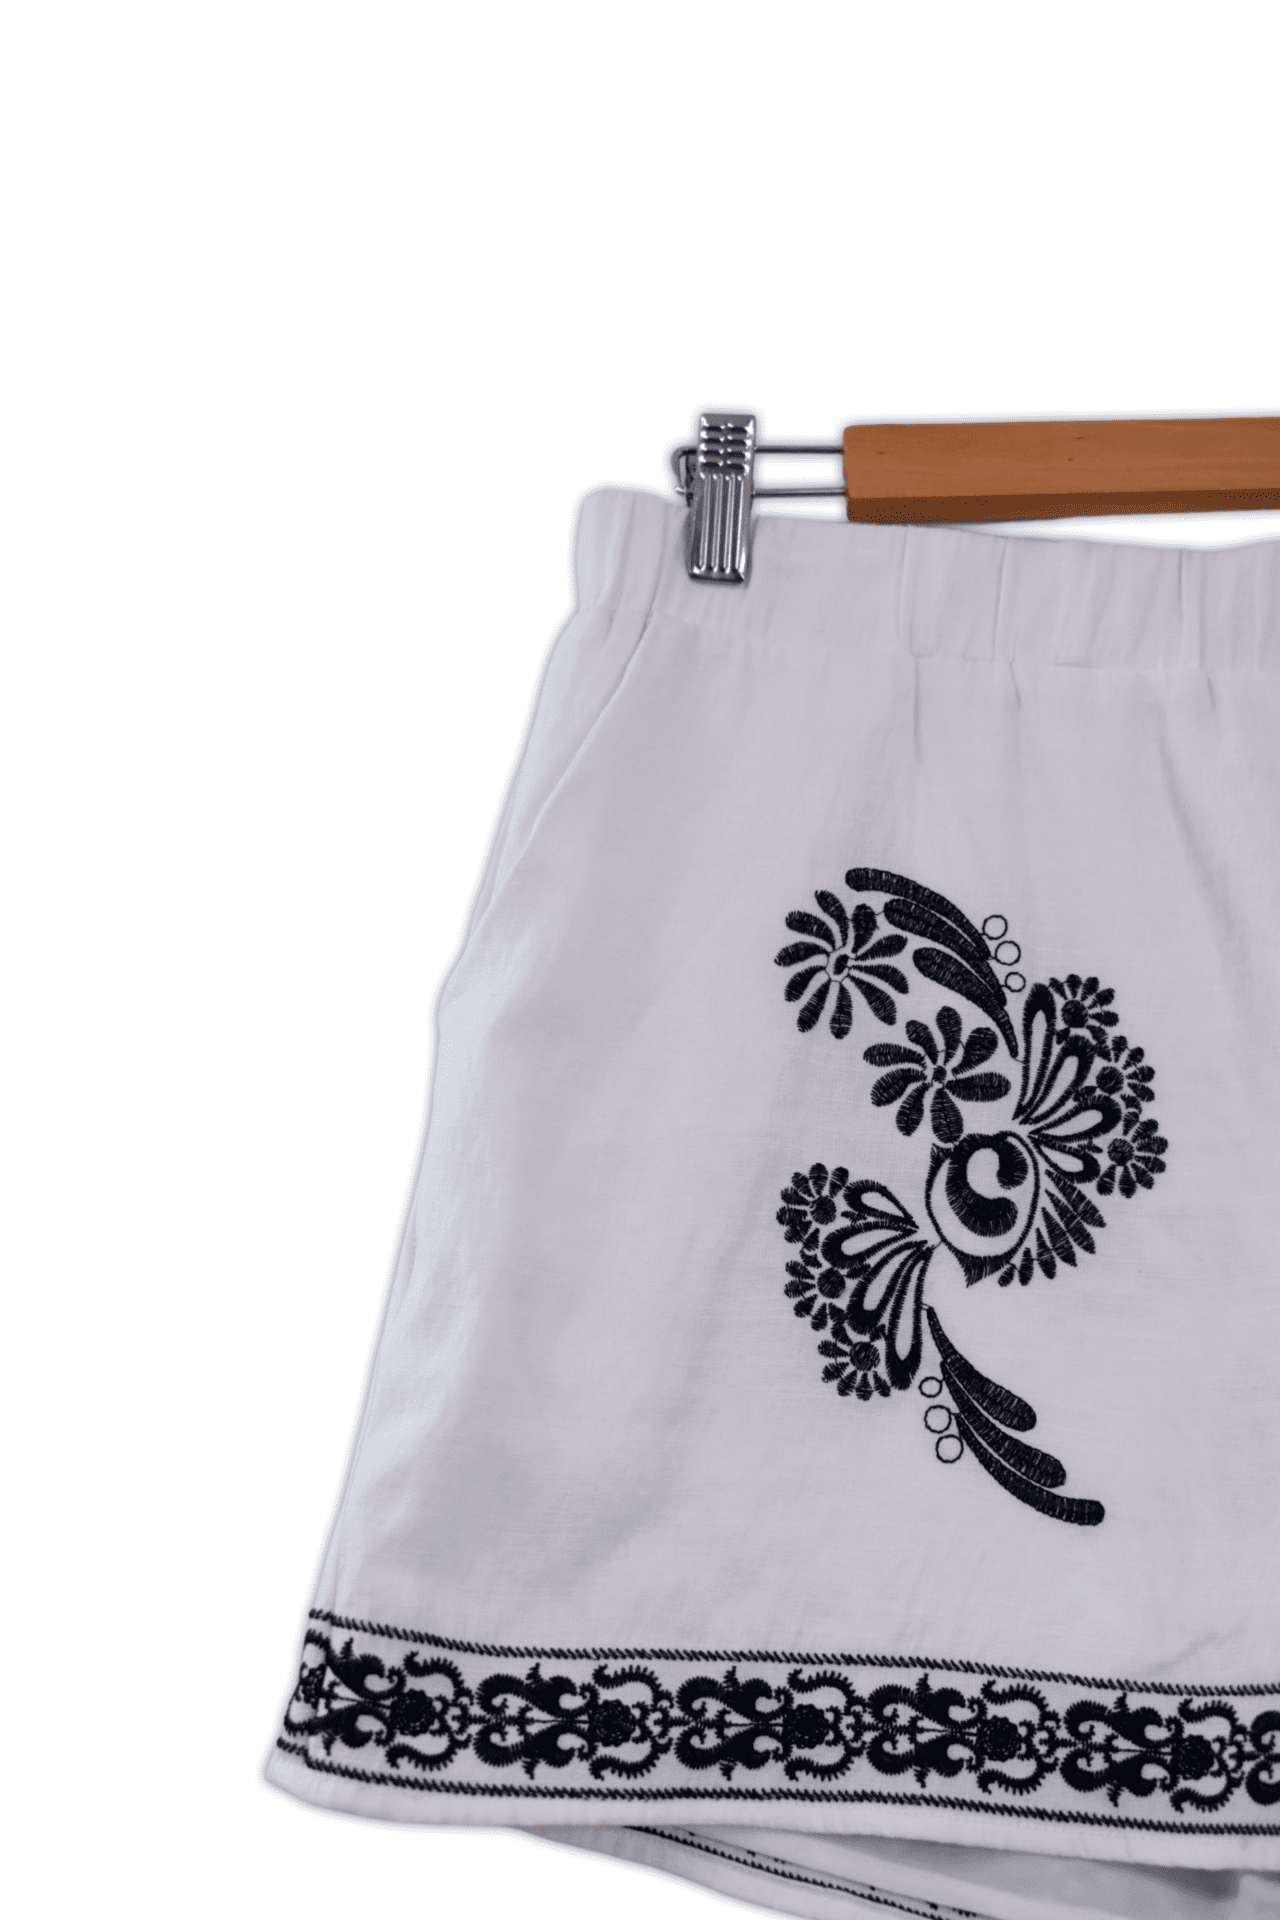 Lightweight summer shorts featuring floral embroidered patterns on the front and along the hemline. The shorts are also a medium size with an elastic waist band.